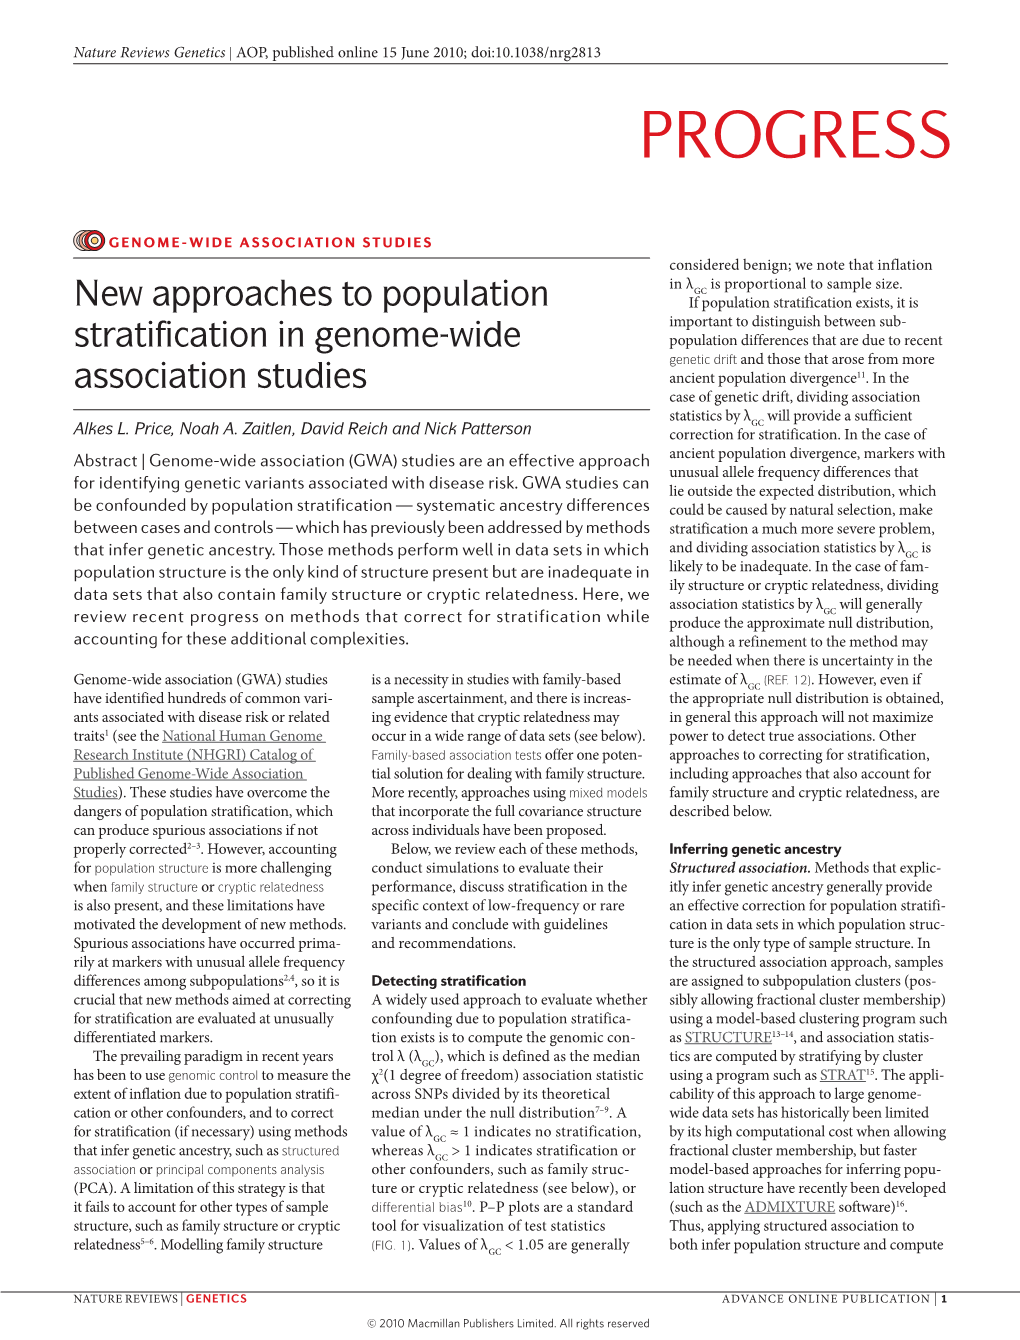 New Approaches to Population Stratification in Genome-Wide